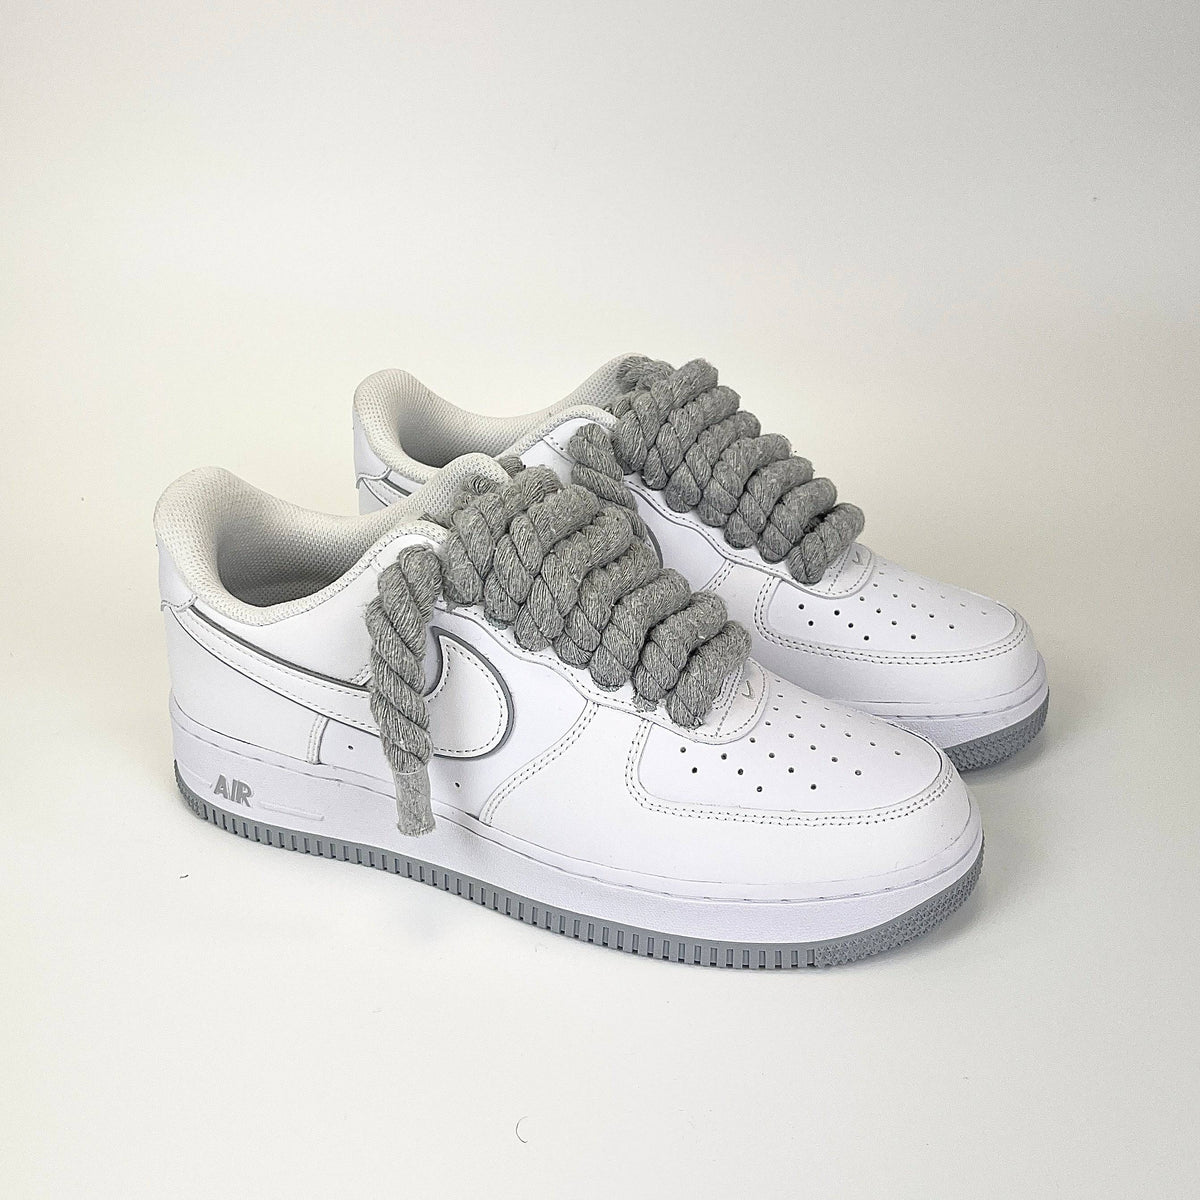 Rope Air Force 1 - Cement - No Sauce The Plug